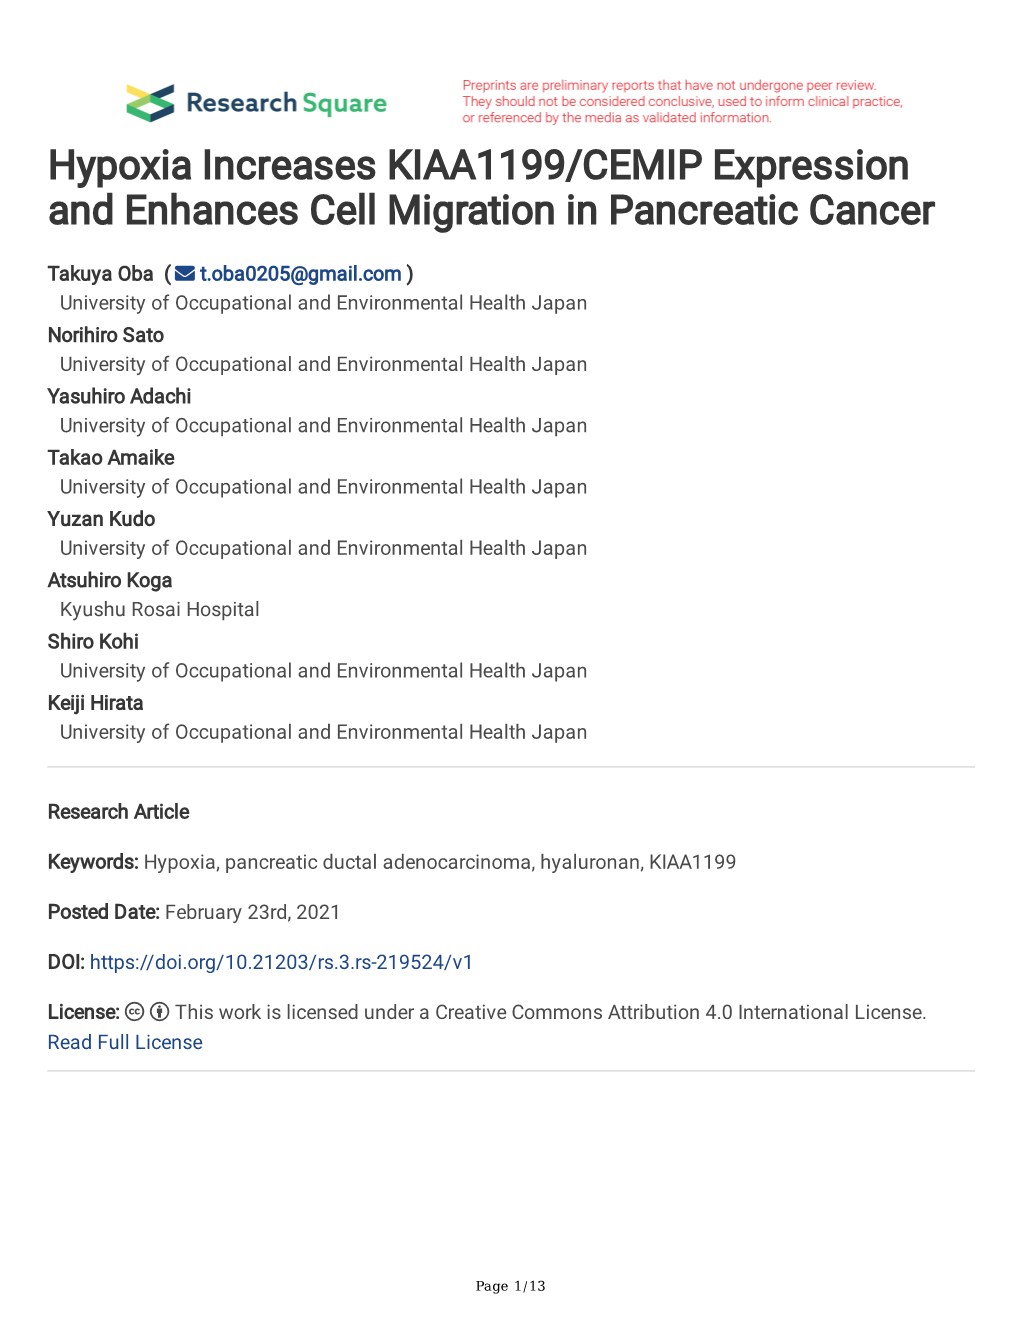 Hypoxia Increases KIAA1199/CEMIP Expression and Enhances Cell Migration in Pancreatic Cancer